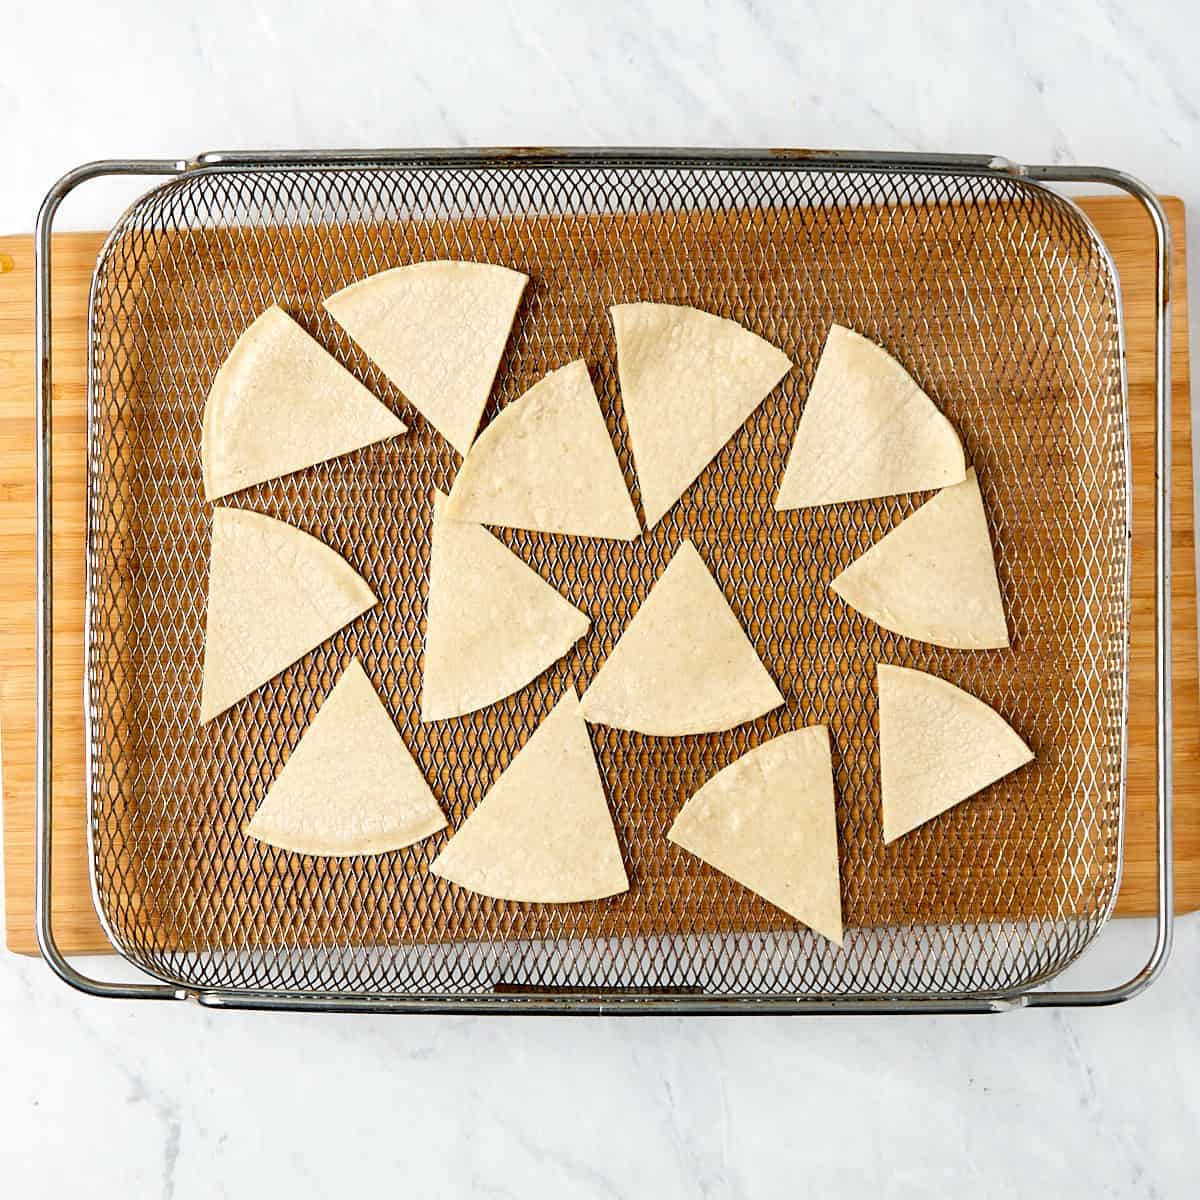 tortilla triangular wedges laid out on an air fryer tray before going in the oven.